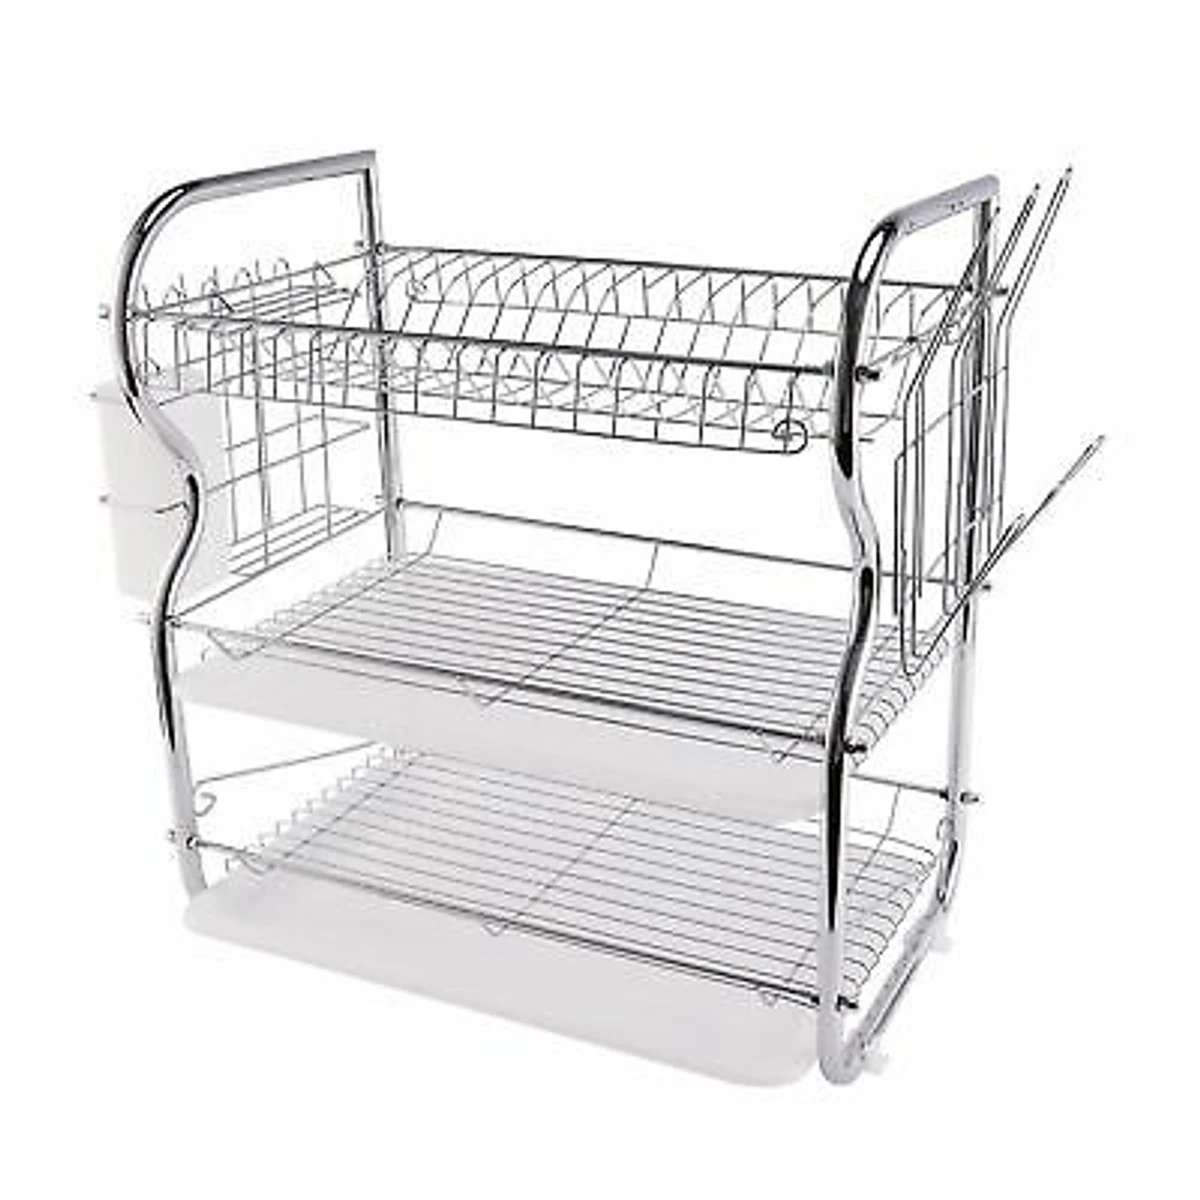 Dish Drying Rack, NBSail 3 lier Dish Rack Stainless Steel Dish Drainer Utensil Holder, Cutting Board Holder with Removable Drain Board for Kitchen Countertop